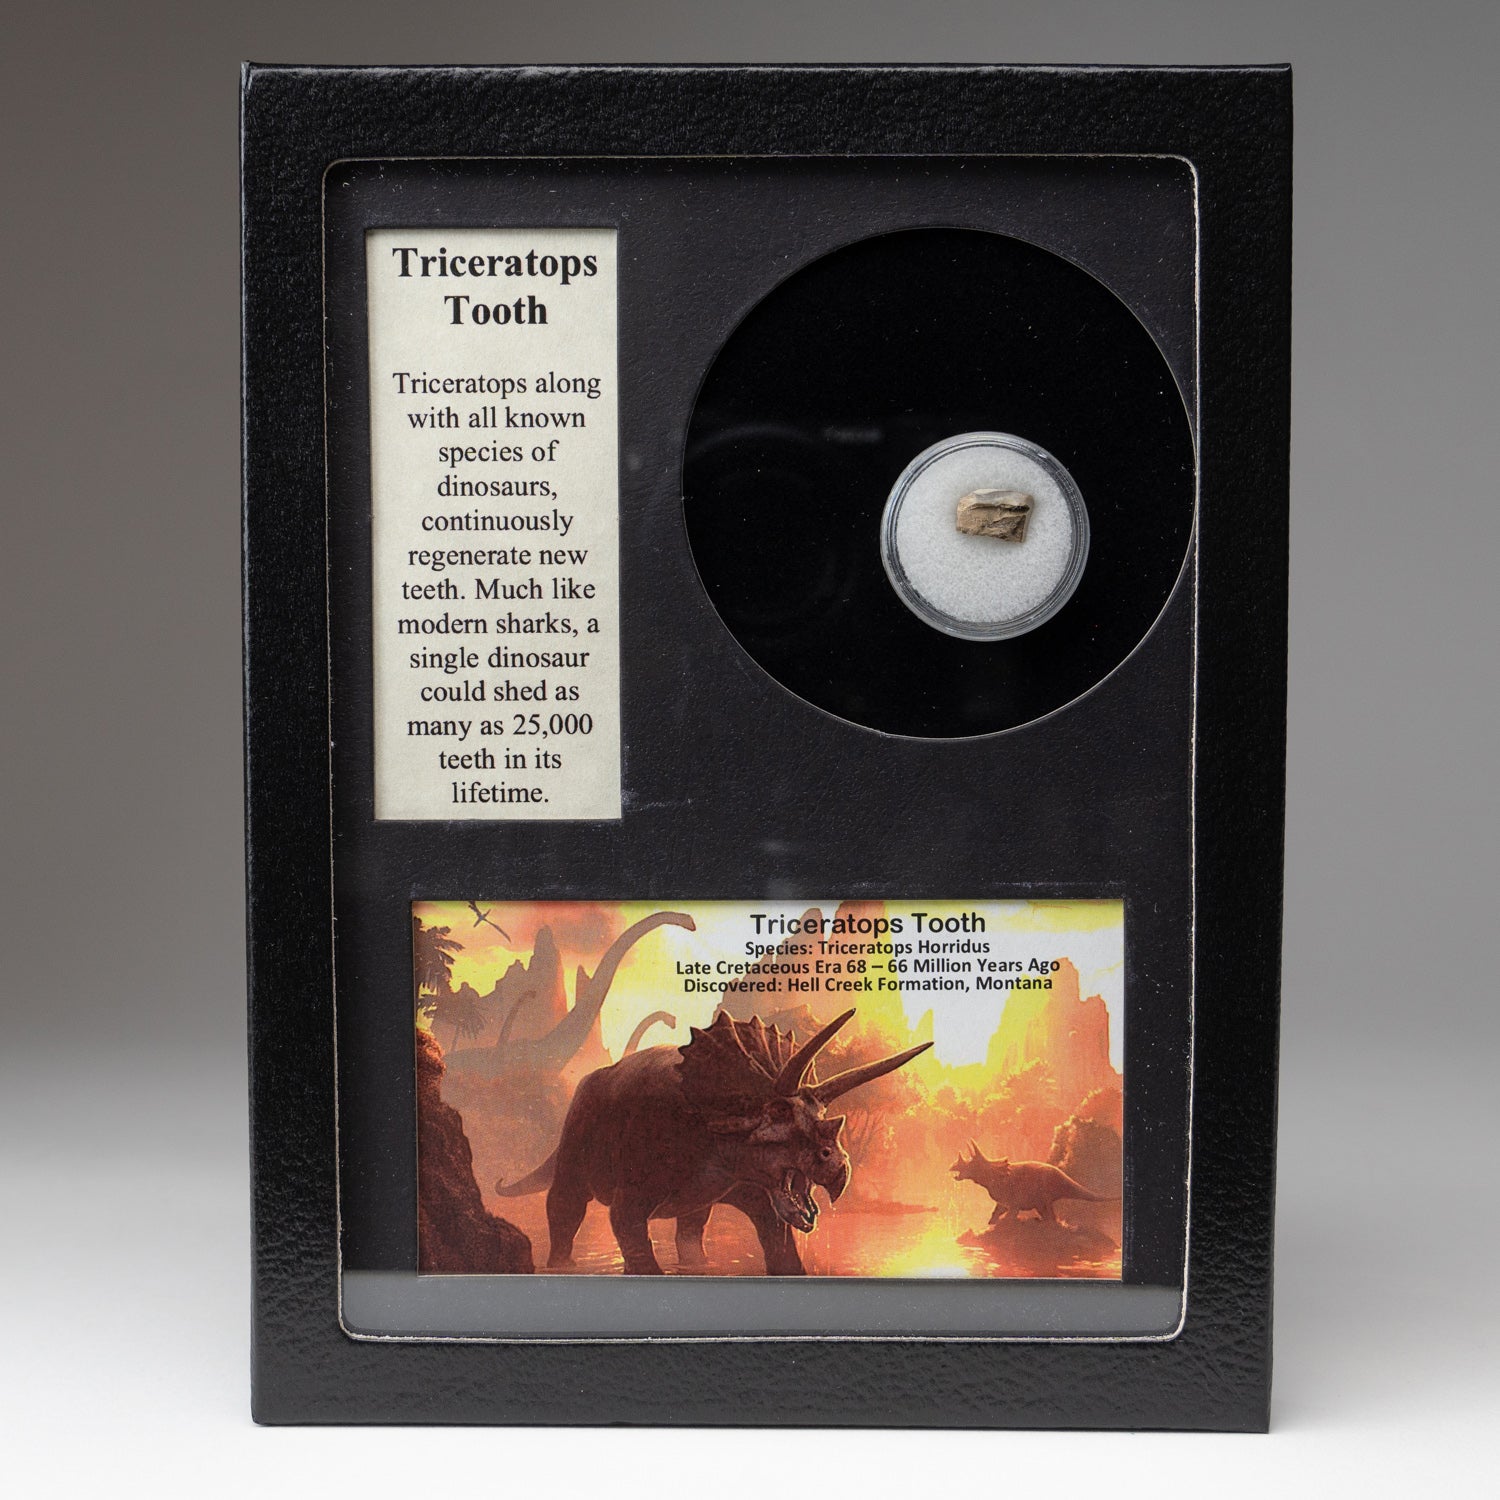 Genuine Triceratops Tooth in a Glass Display Box